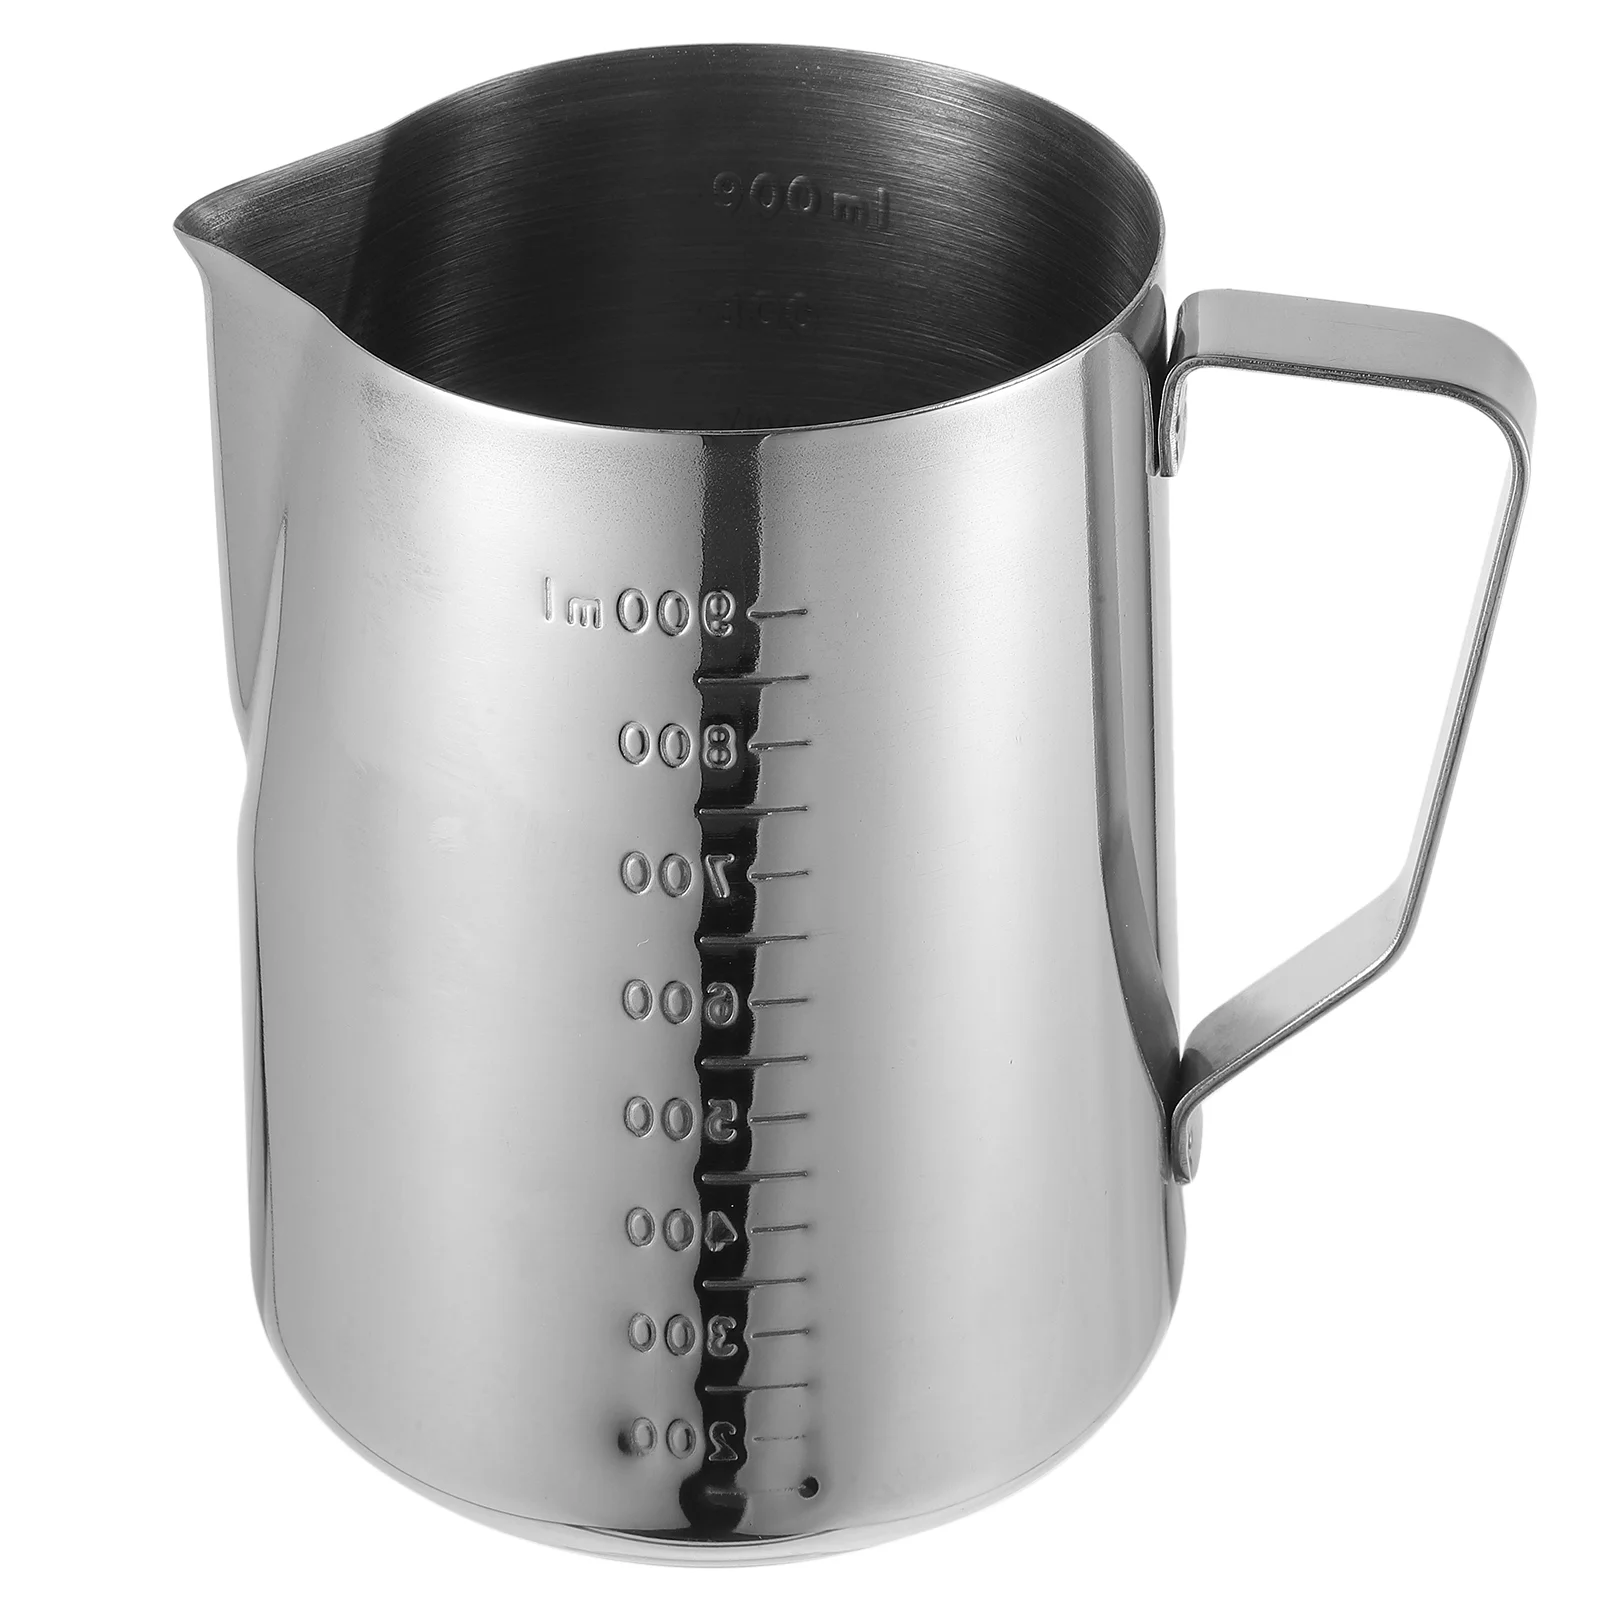 

High Temperature Melting Wax Cup Scented Pot Making Melter Pouring Alloy Pitcher Large Stainless Steel Water Steamer